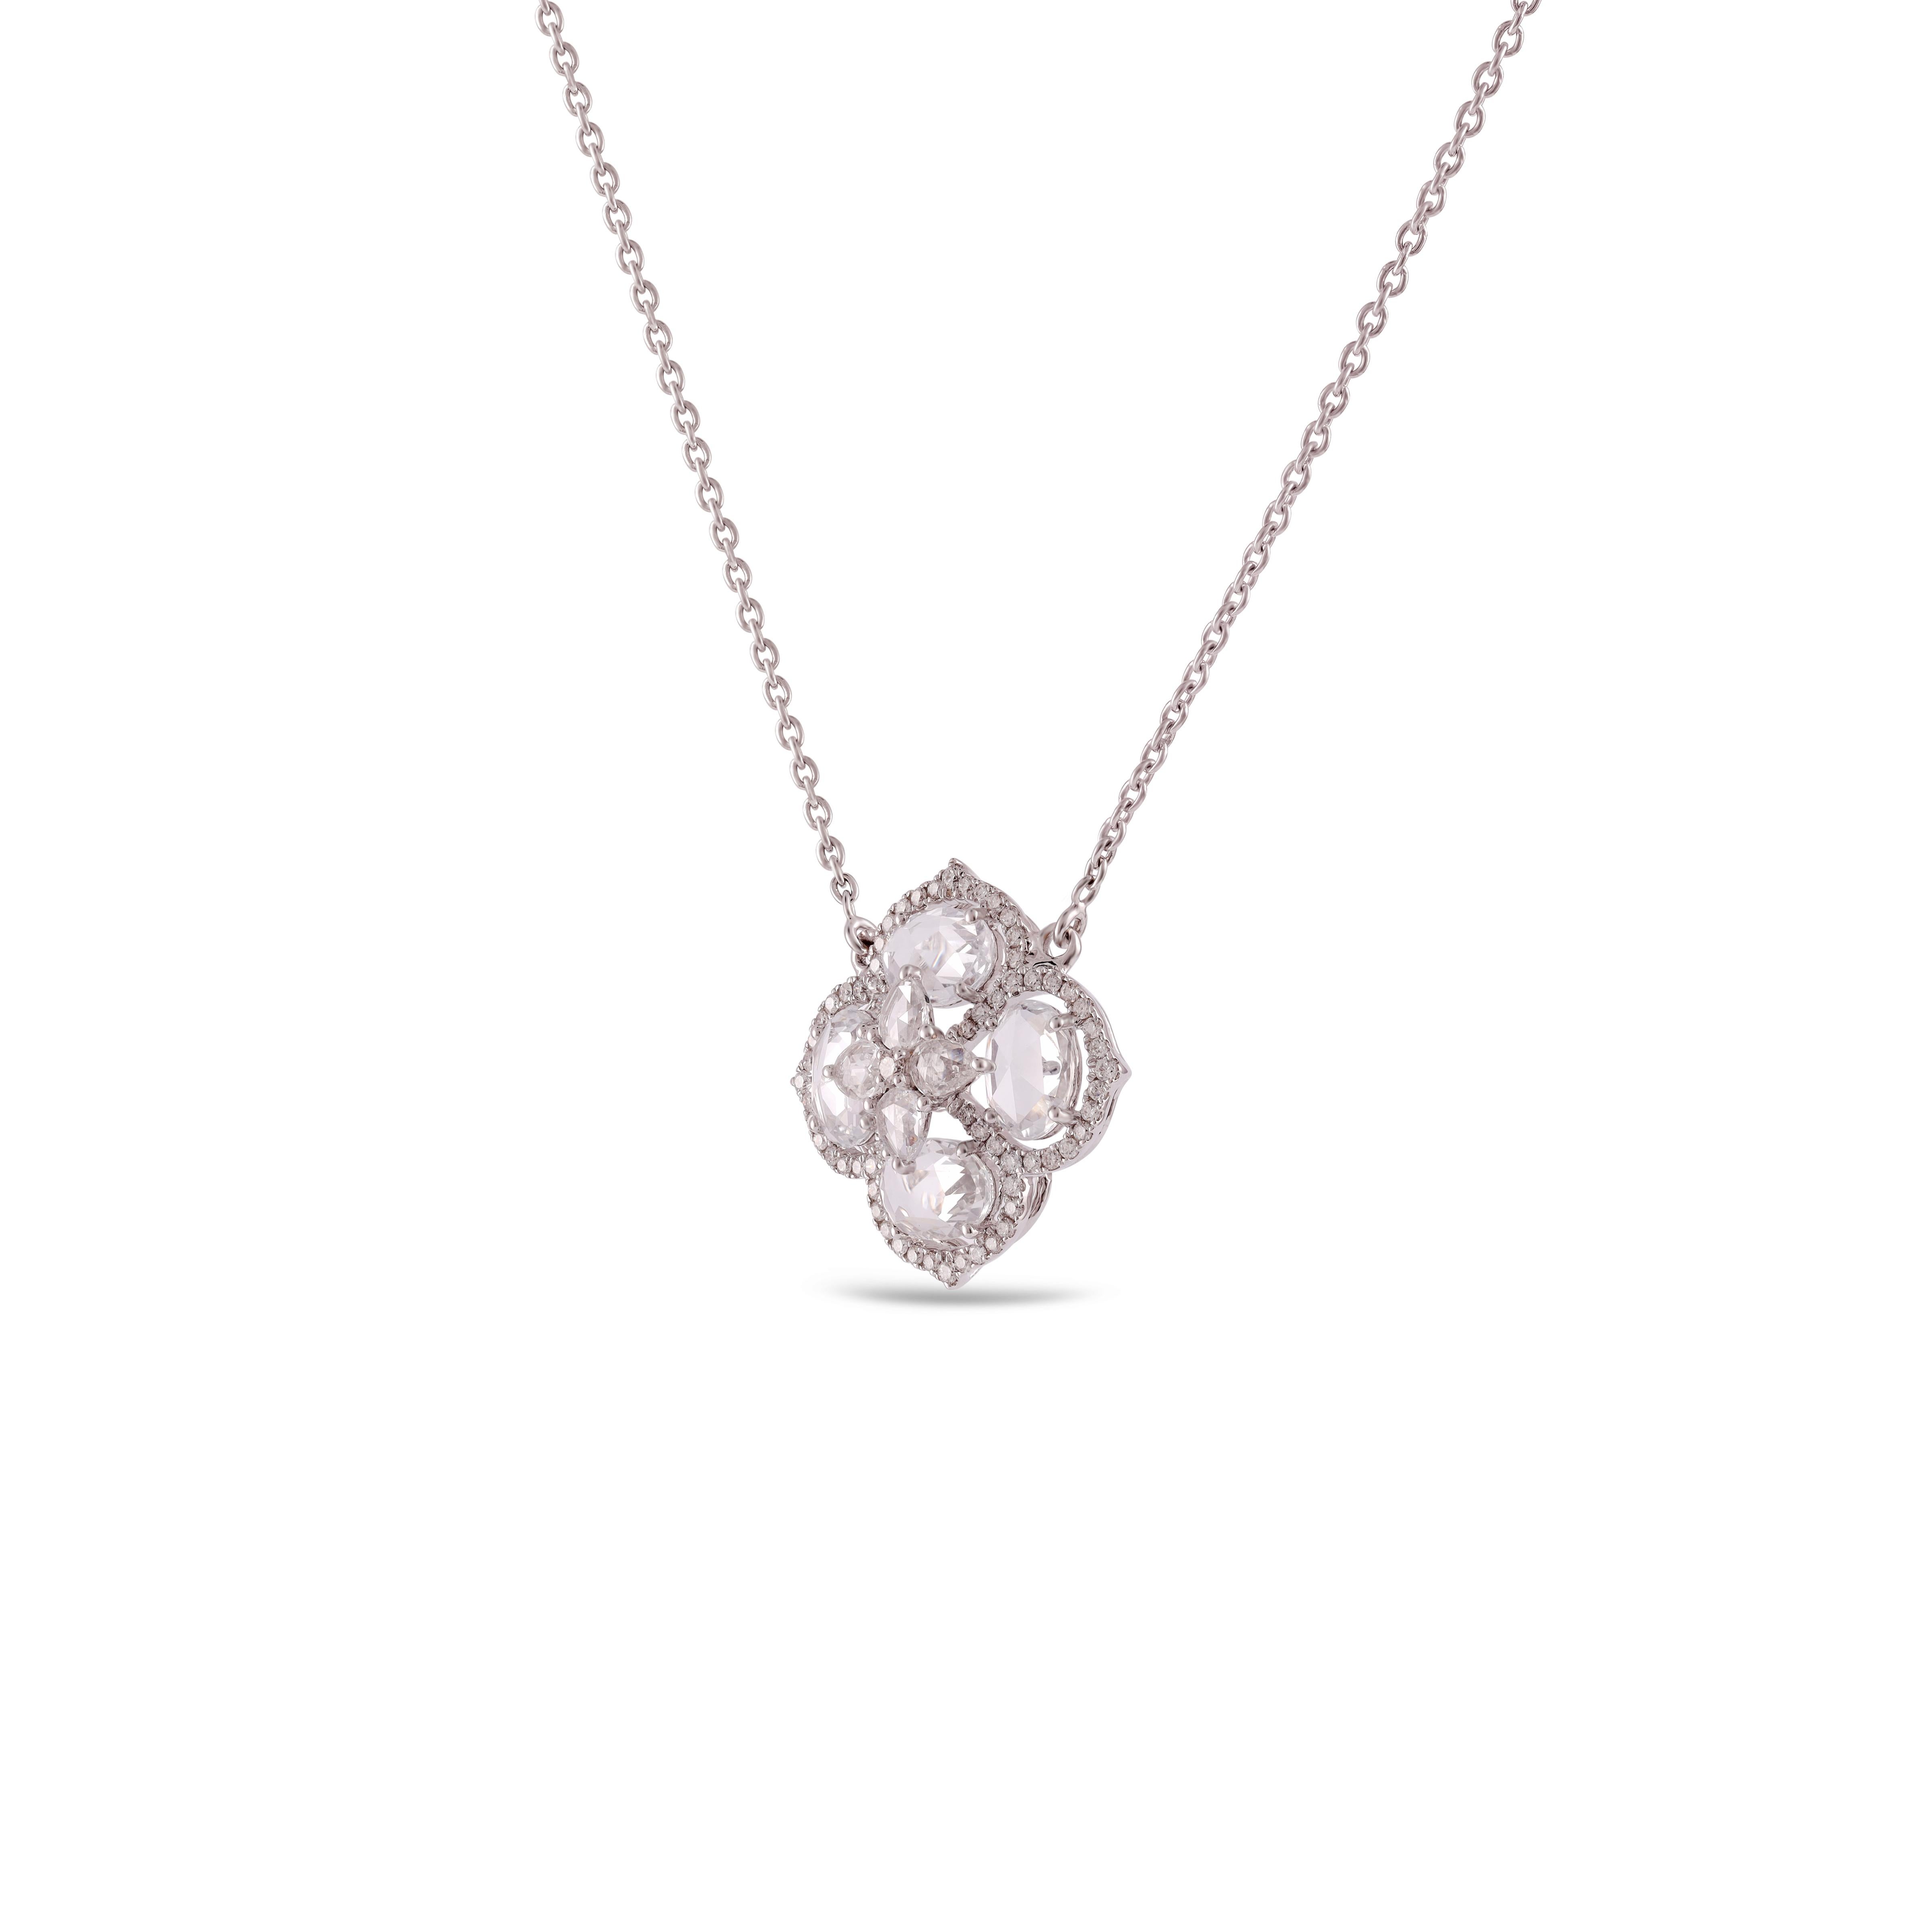 18 Karat White Gold And Diamond
This beautiful pendant is made from Floral shape White colour Sapphire 3.04 And Diamond 0.62 Carats
White Gold 6.18 Grams.
